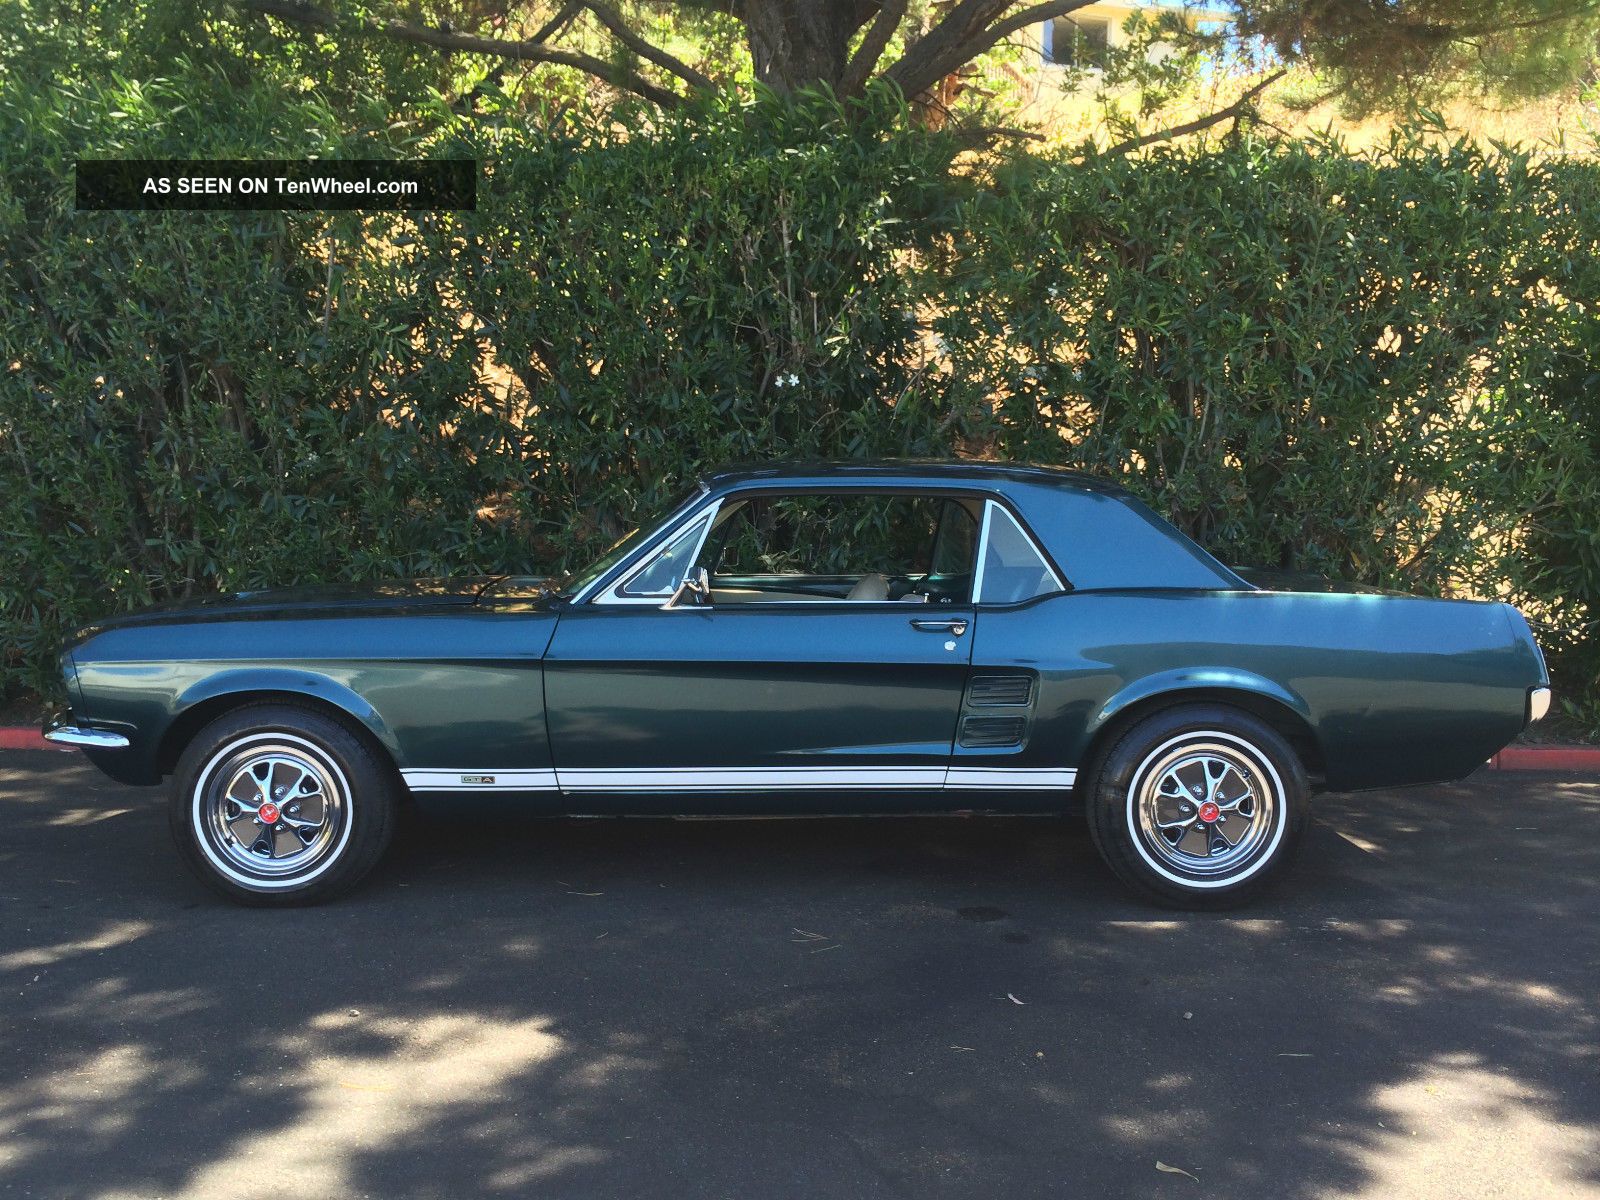 1967 Ford mustang gta coupe sale #1